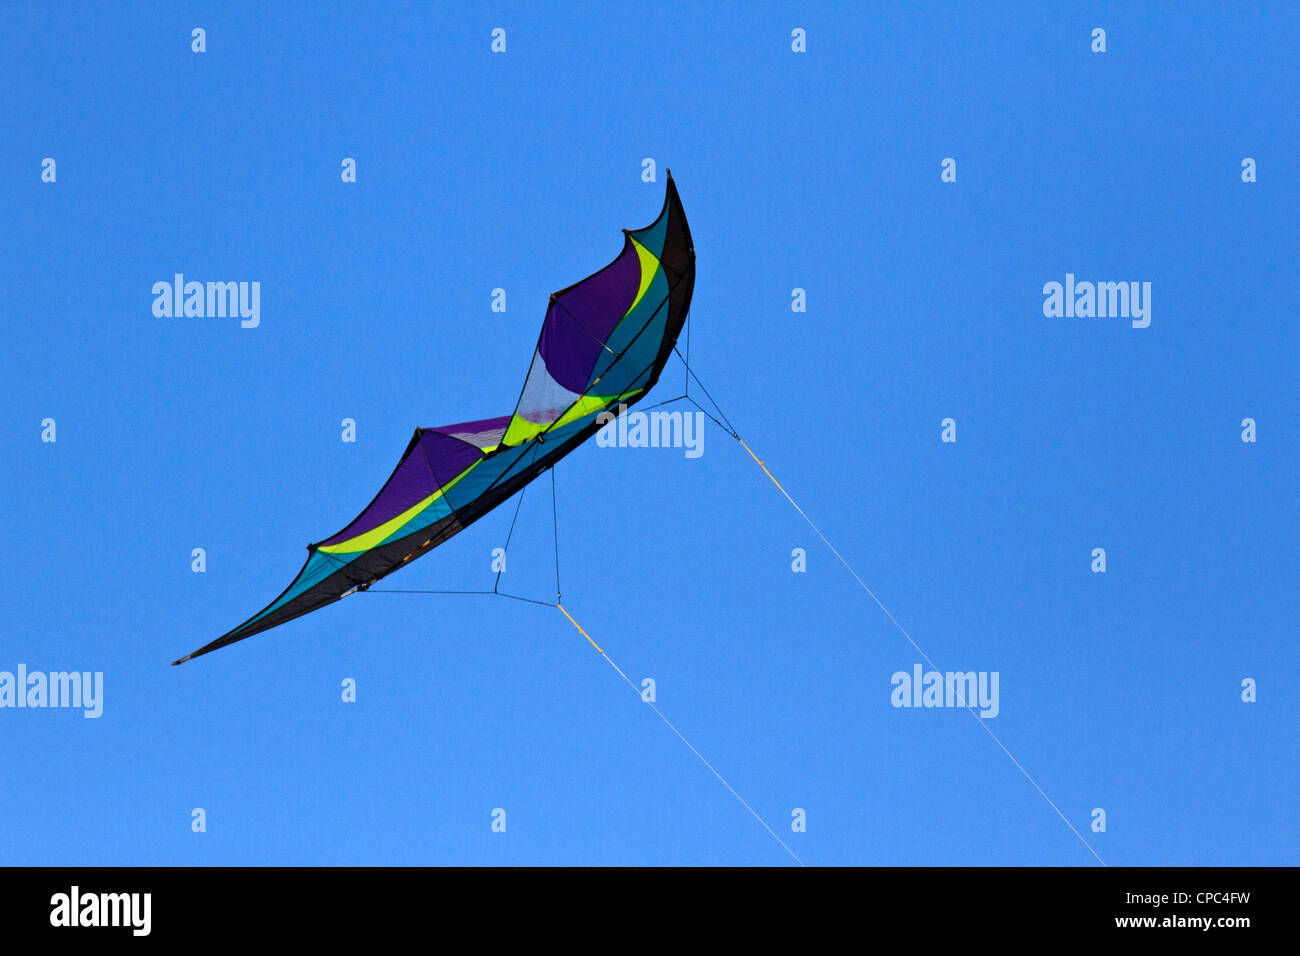 Kite flying against a clear, blue, cloudless sky. Stock Photo